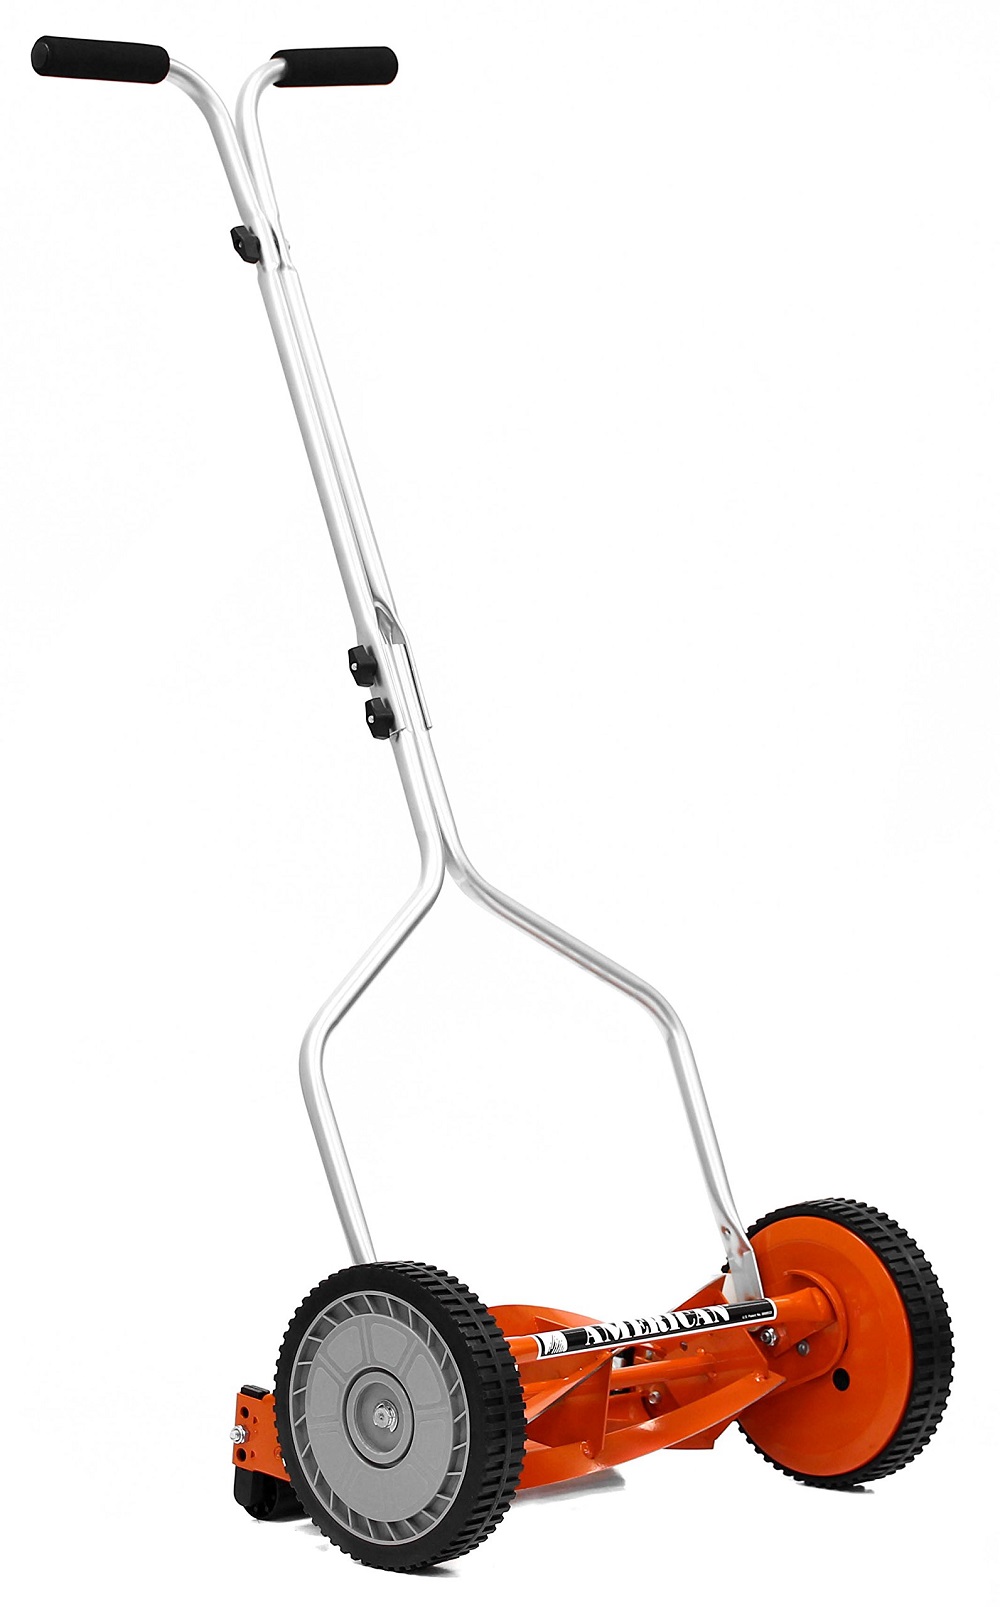 lw1 Small lawnmower options that you can buy online